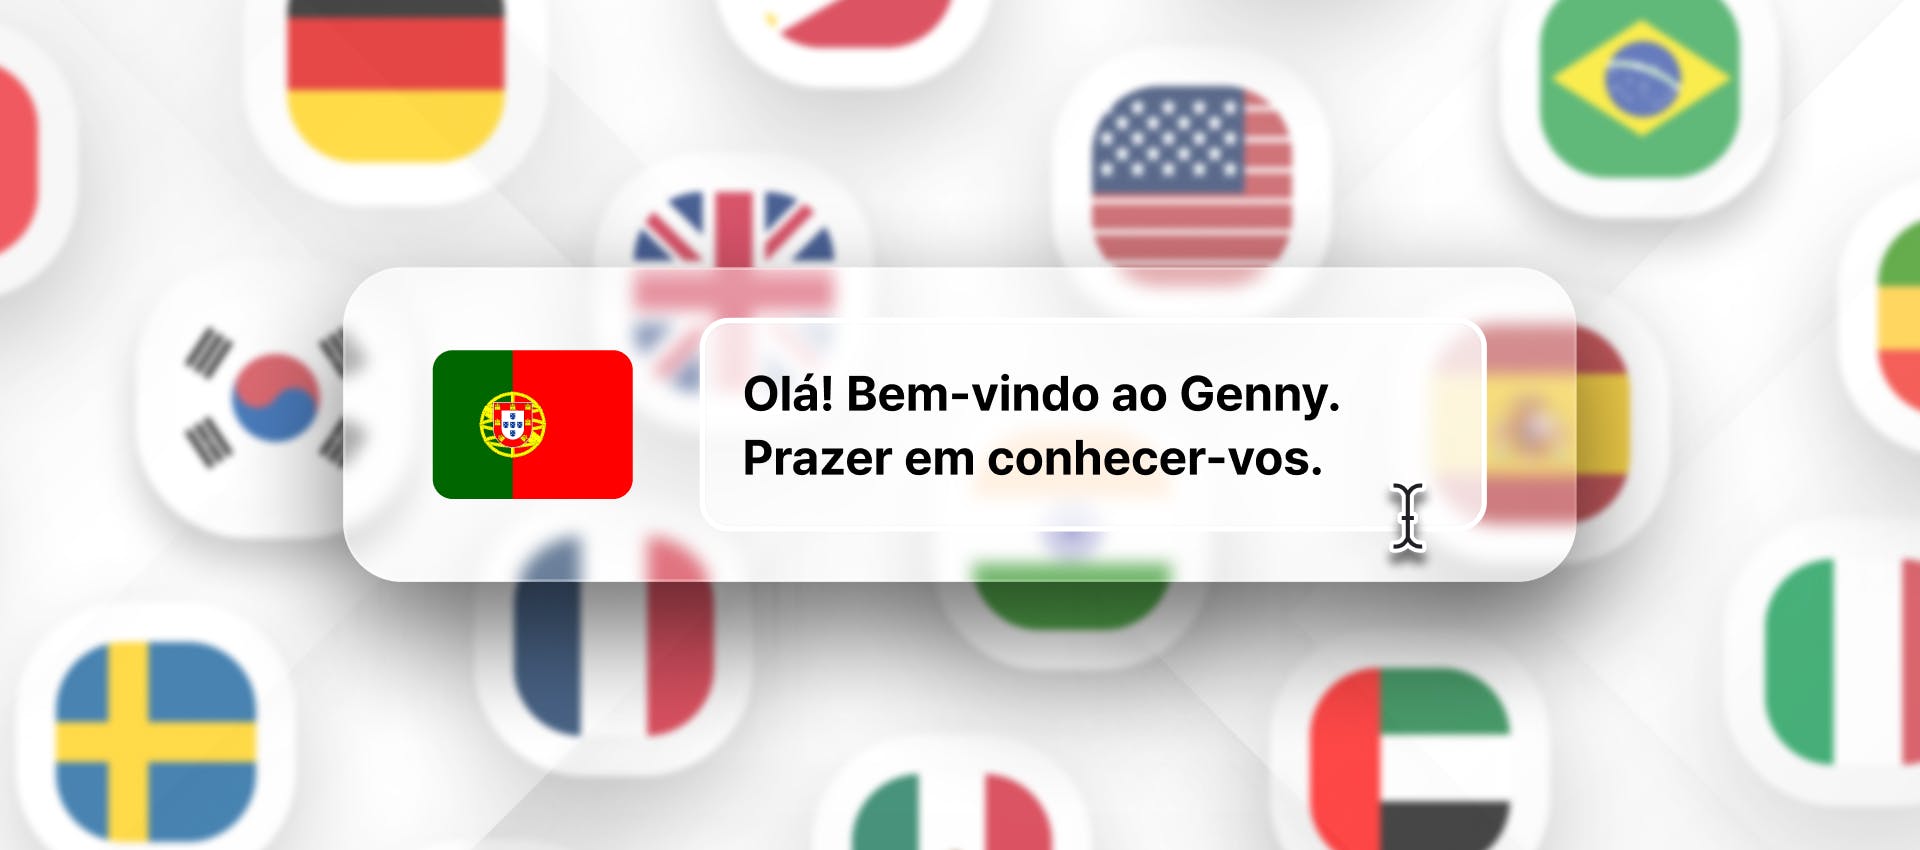 Portuguese phrase for Portuguese TTS generation with different flags in the background